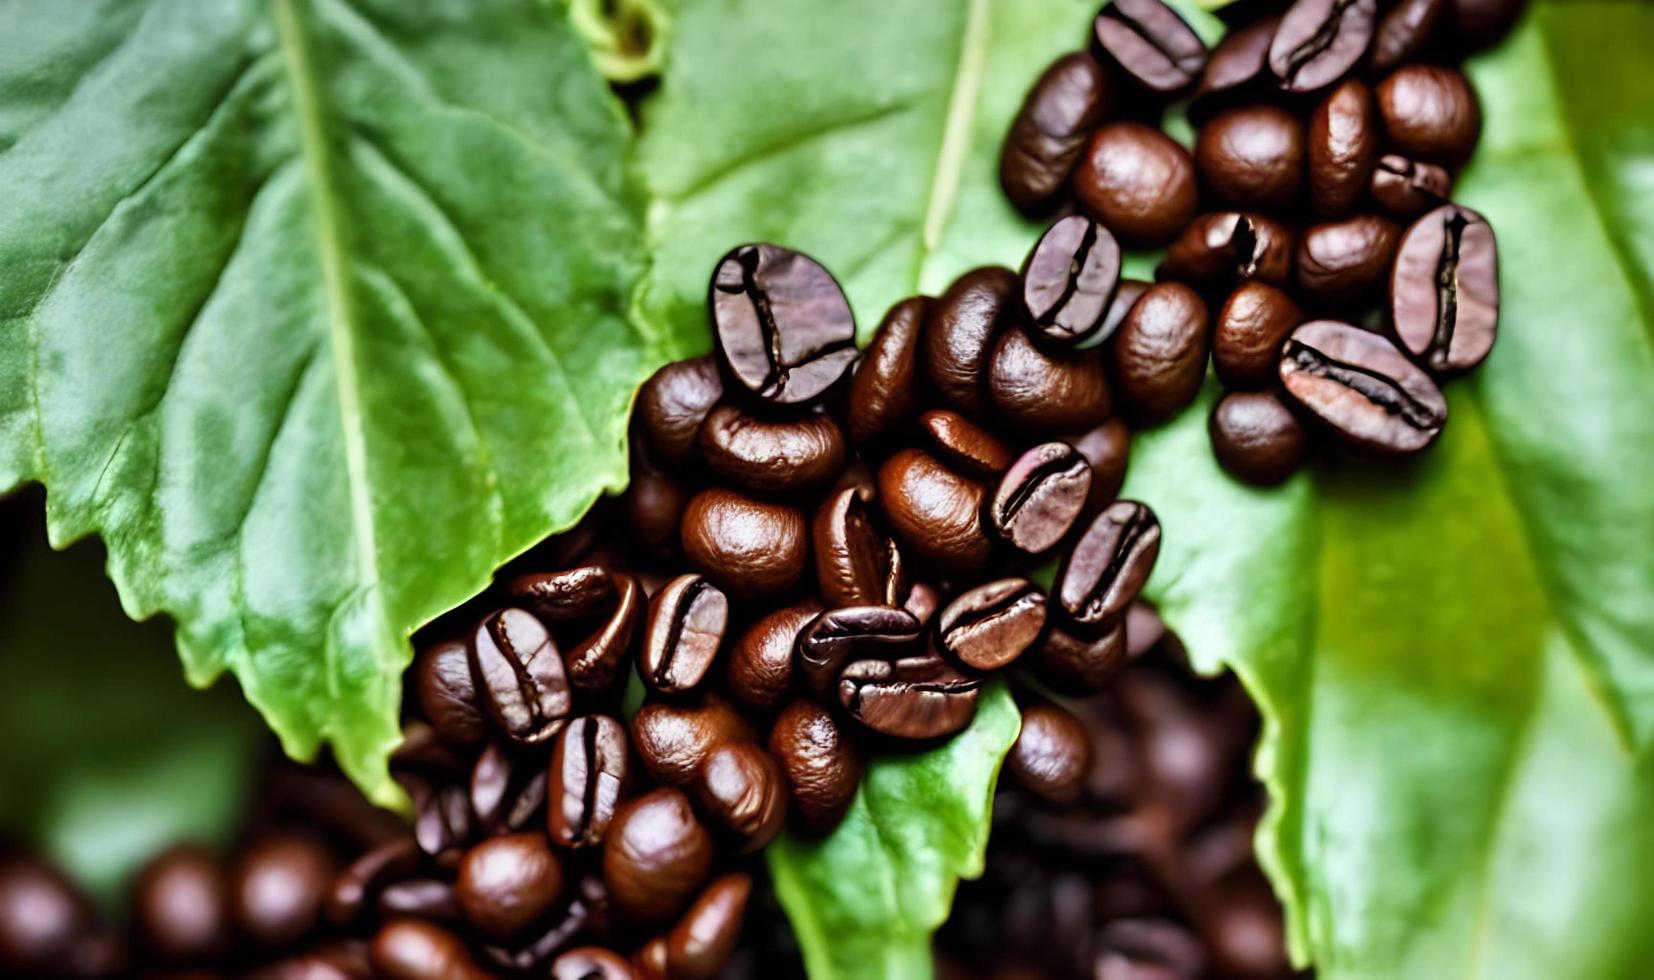 Freshly roasted coffee beans. can be used as background. Coffee composition. photo